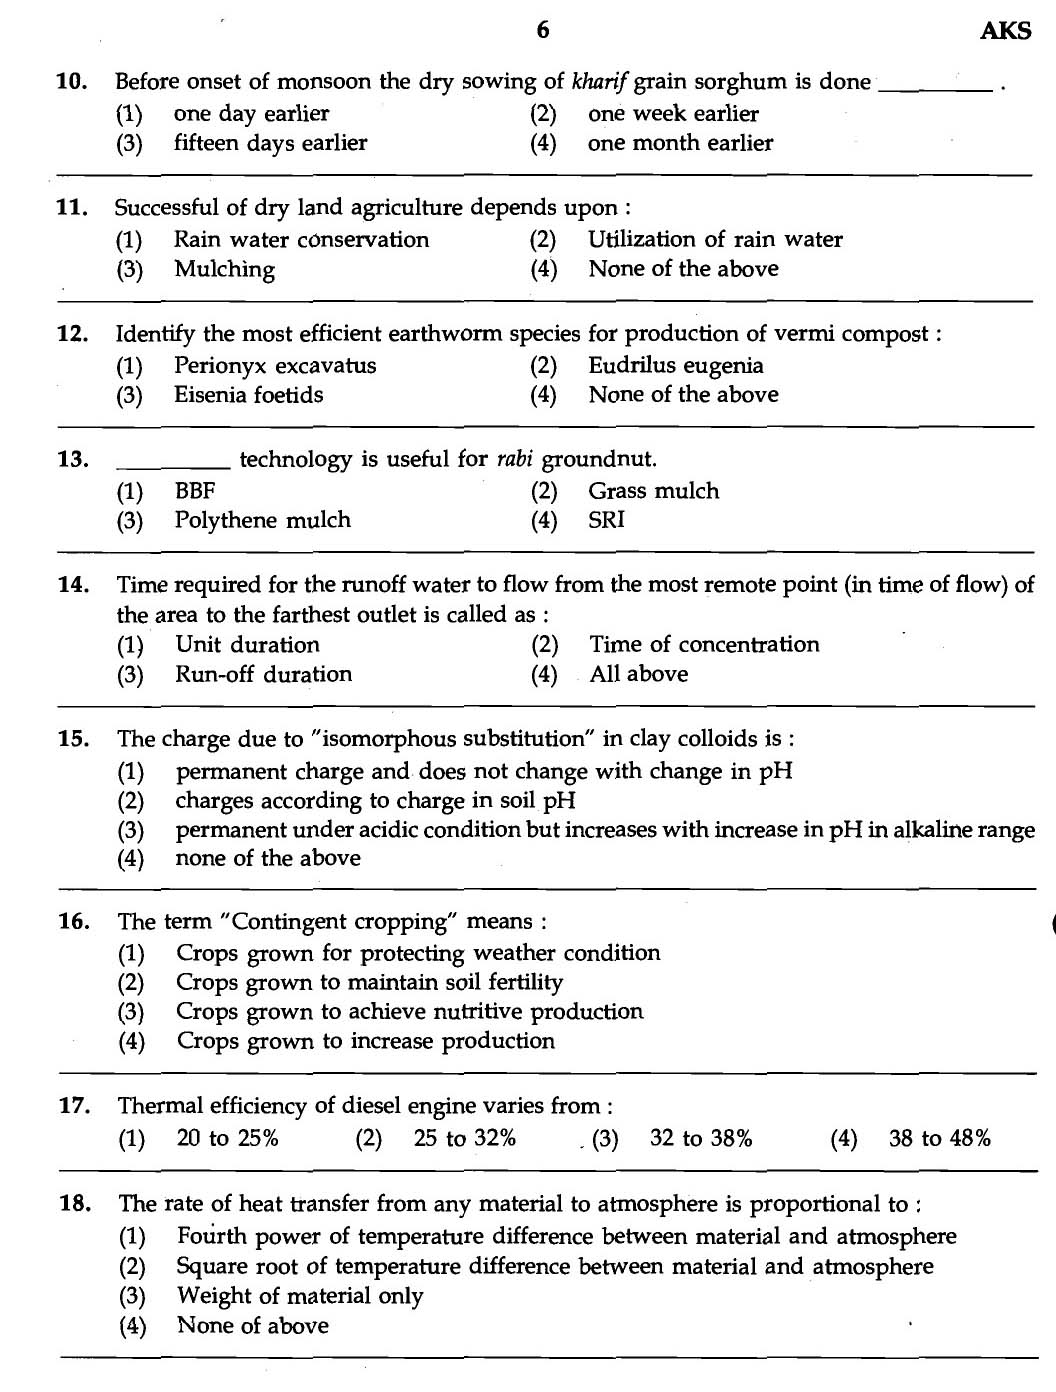 MPSC Agricultural Services Exam 2007 Question Paper Agricultural Science 4